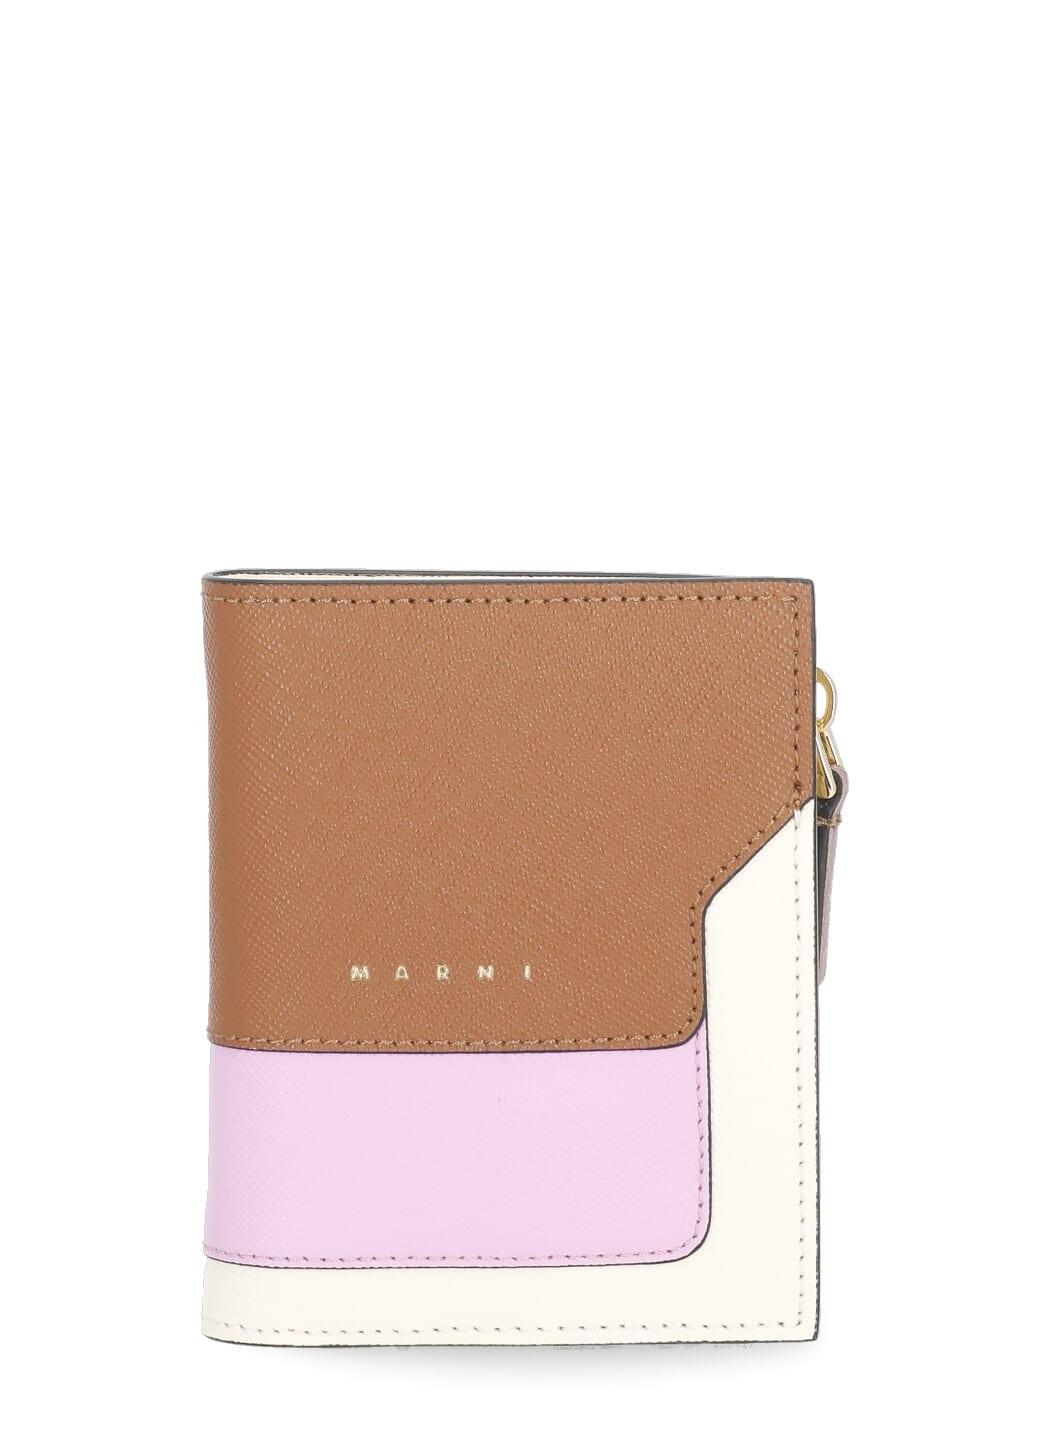 Womens Accessories Wallets and cardholders Marni Leather Bi-fold Wallet in Natural 